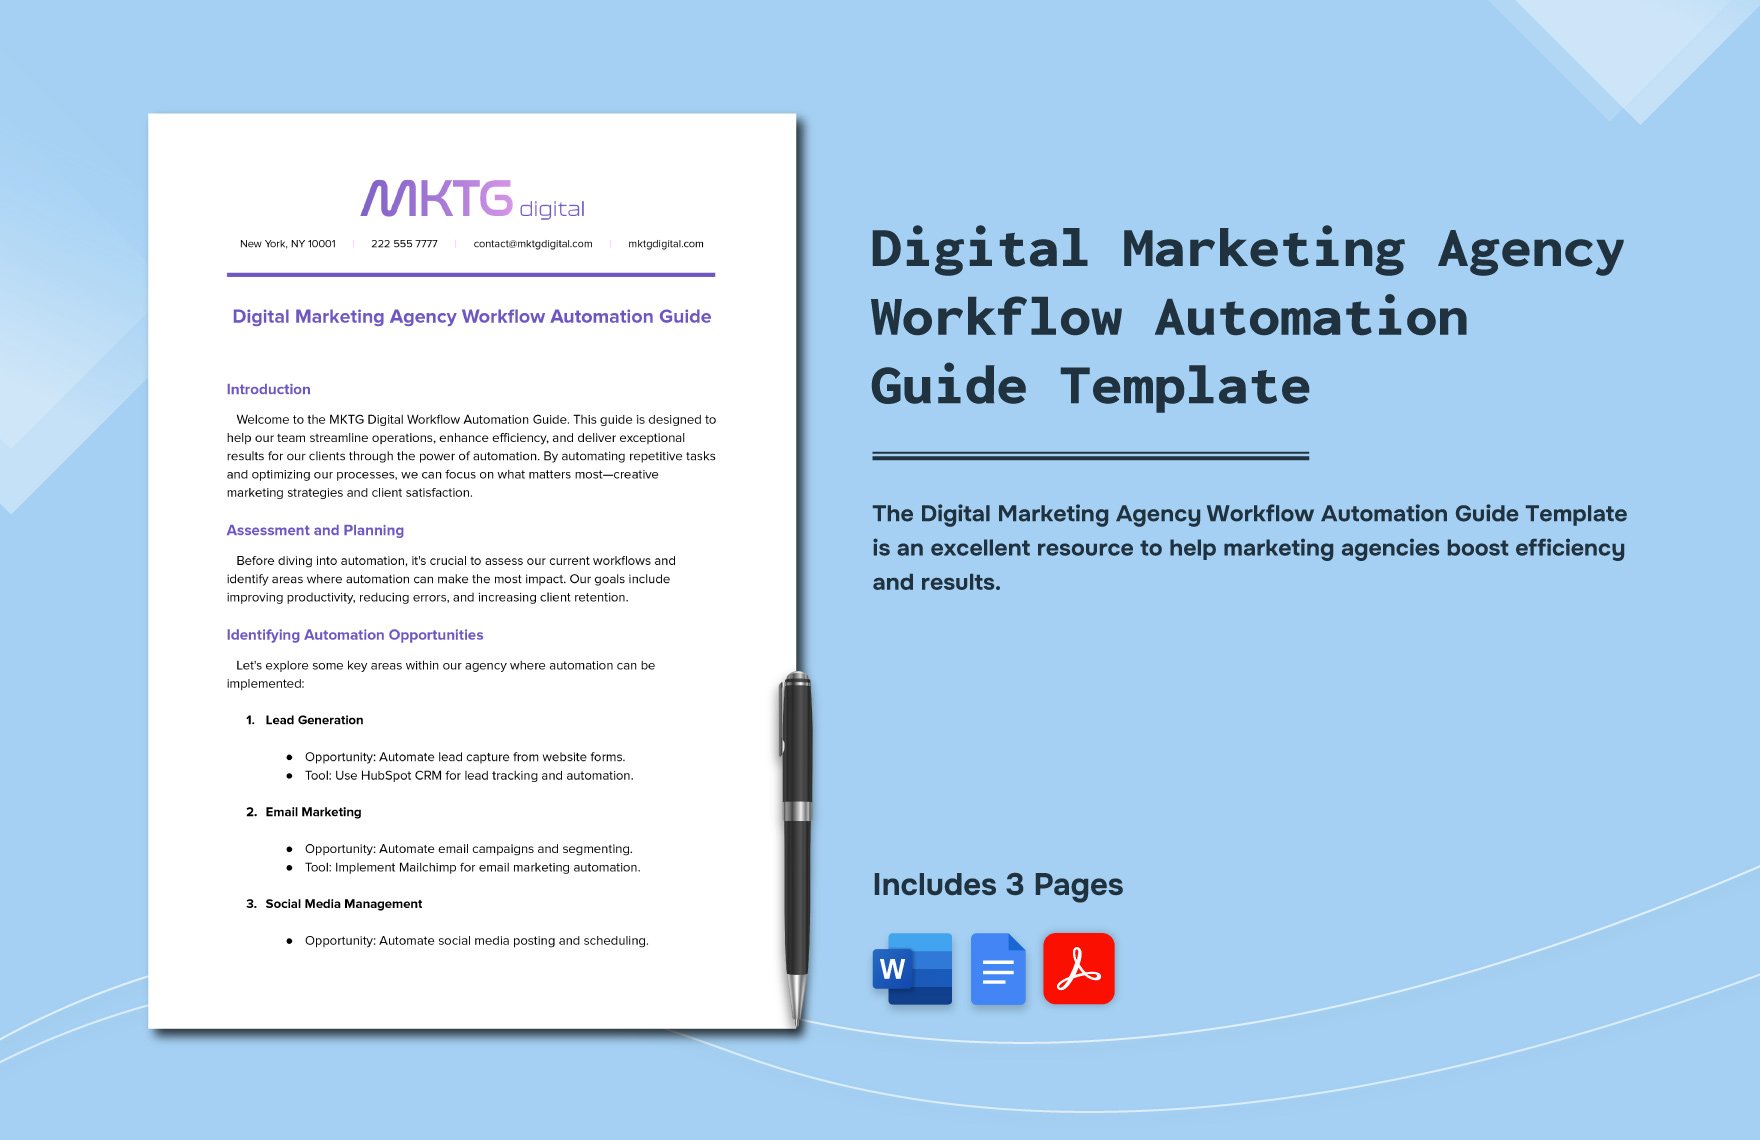 Digital Marketing Agency Workflow Automation Guide Template